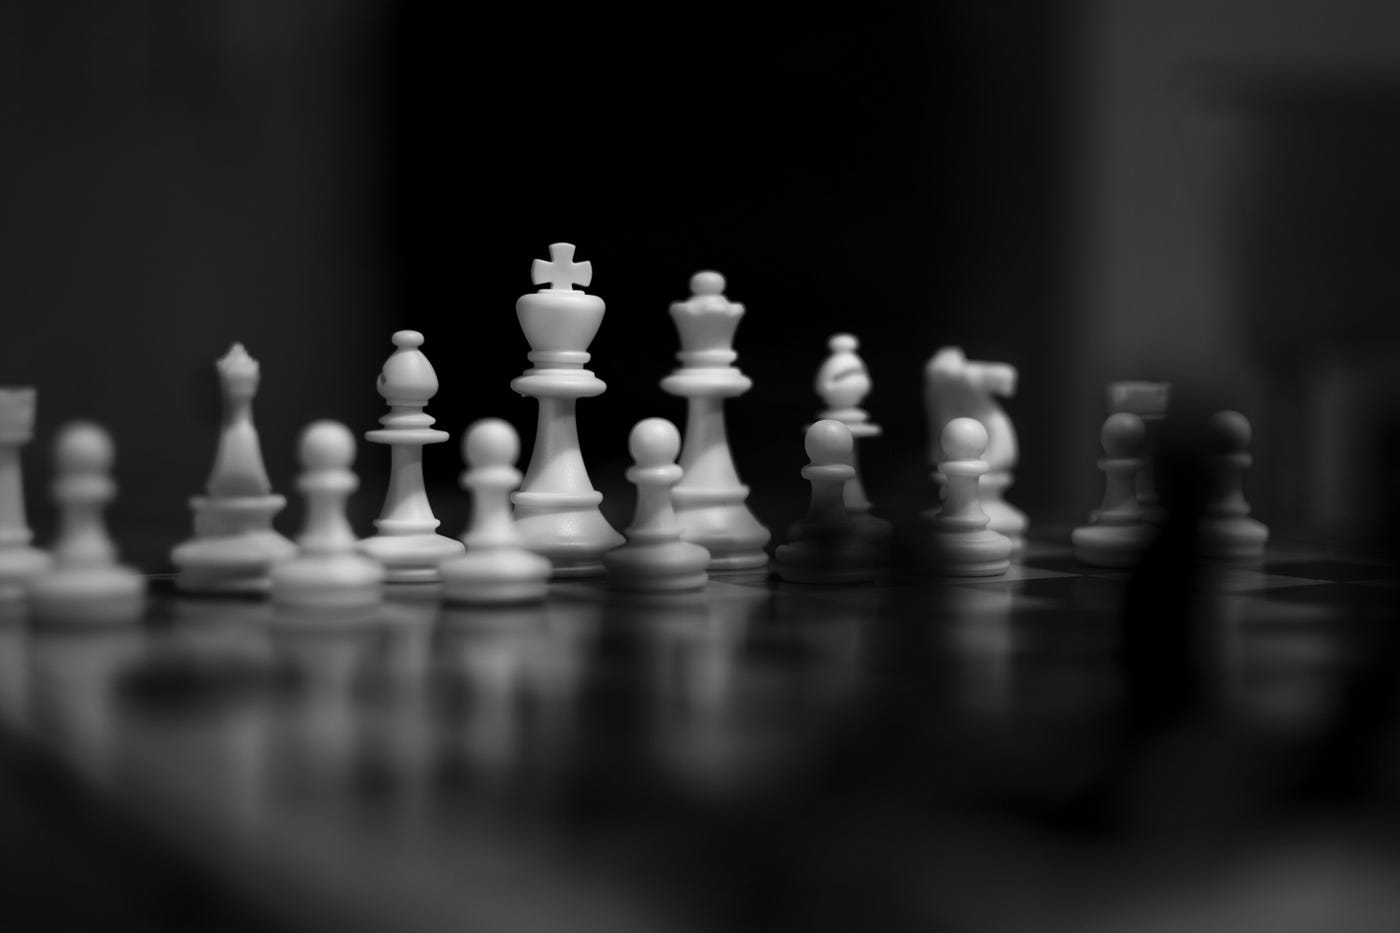 New chess AI makes mistakes like a regular player, grandmaster it is not